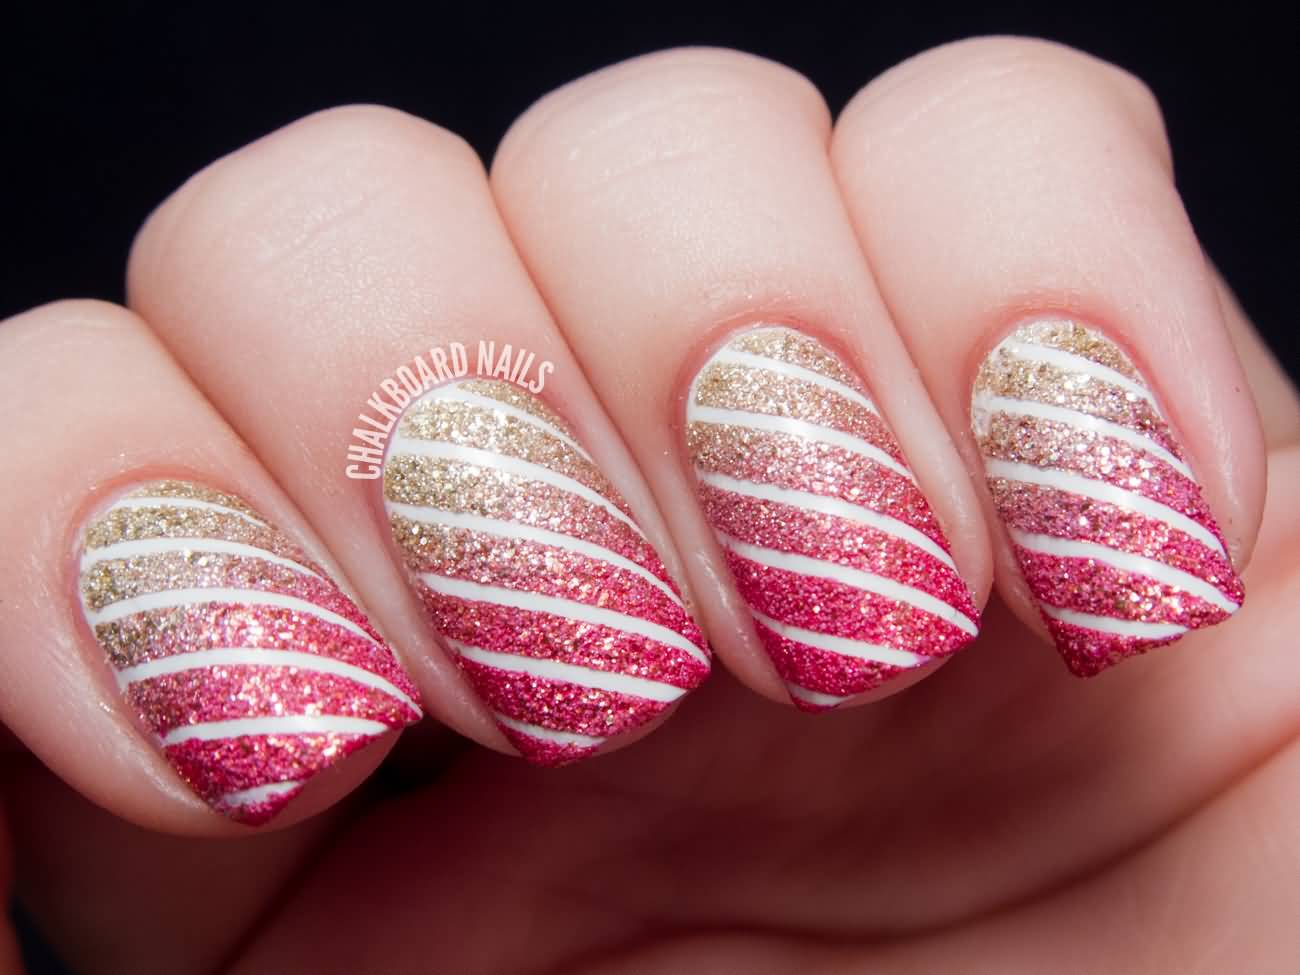 Gold And Pink Glitter Nails With White Stripes Design Nail Art